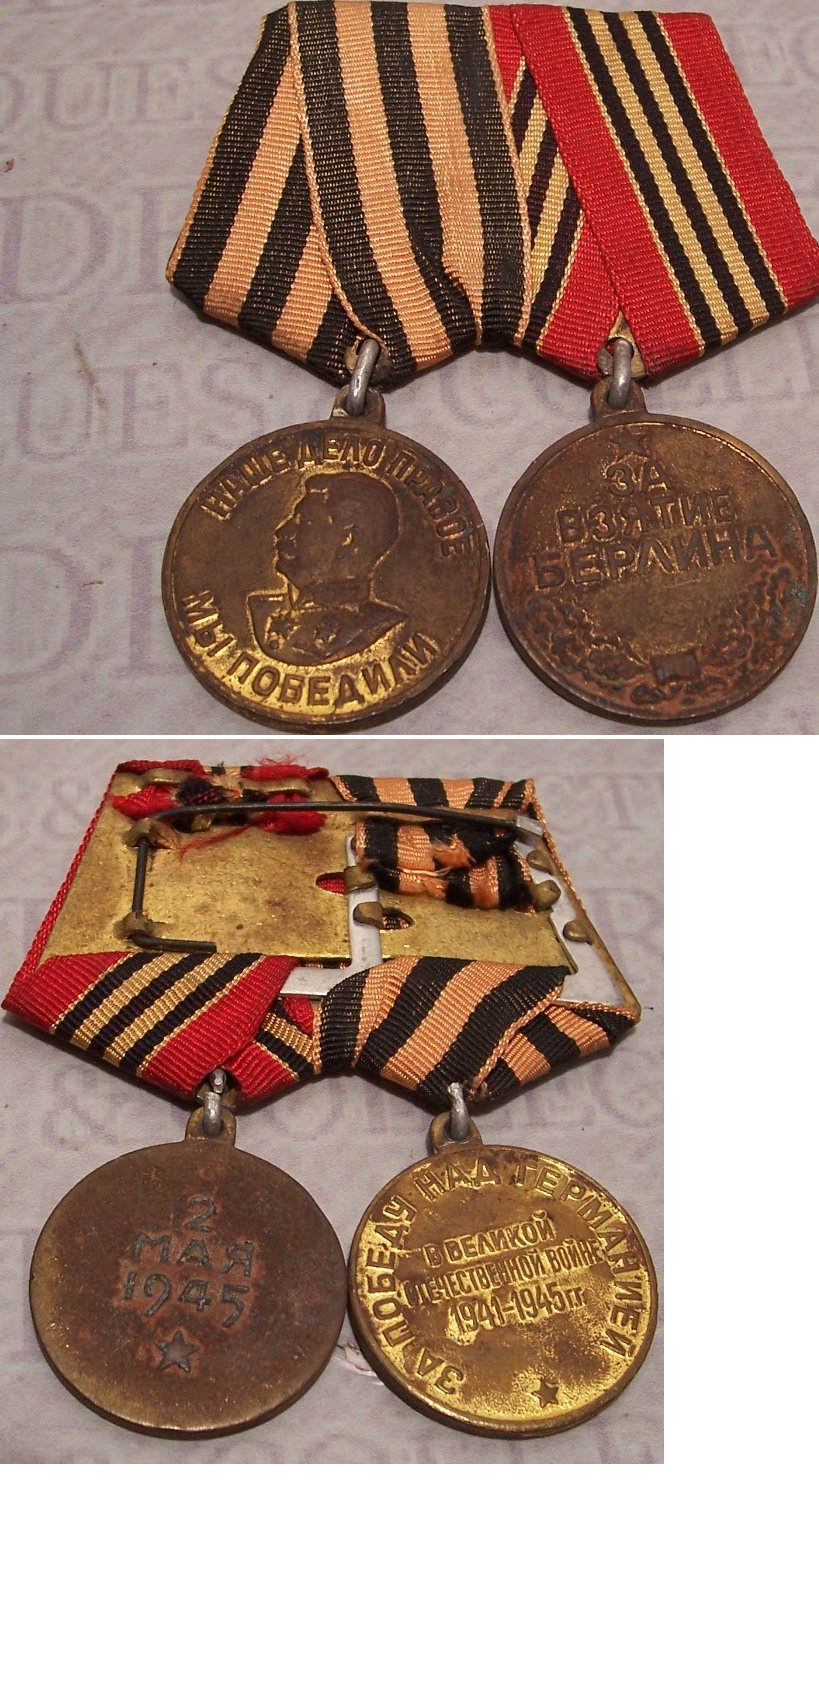 Capture of Berlin and Victory over Germany Medal bar